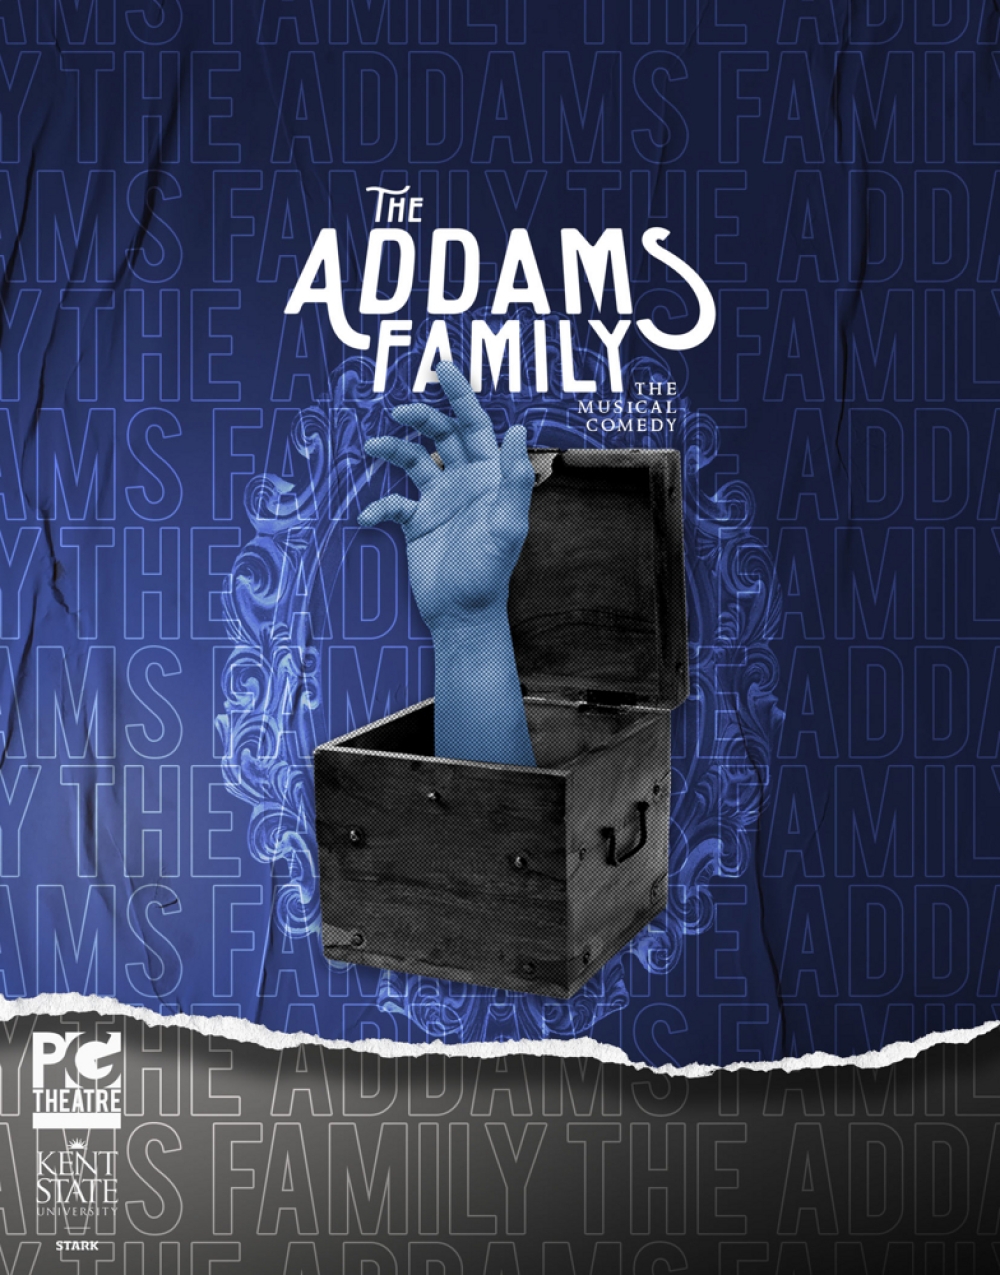 THE ADDAMS FAMILY THE MUSICAL COMEDY - The Players Guild Theatre Stage Mag